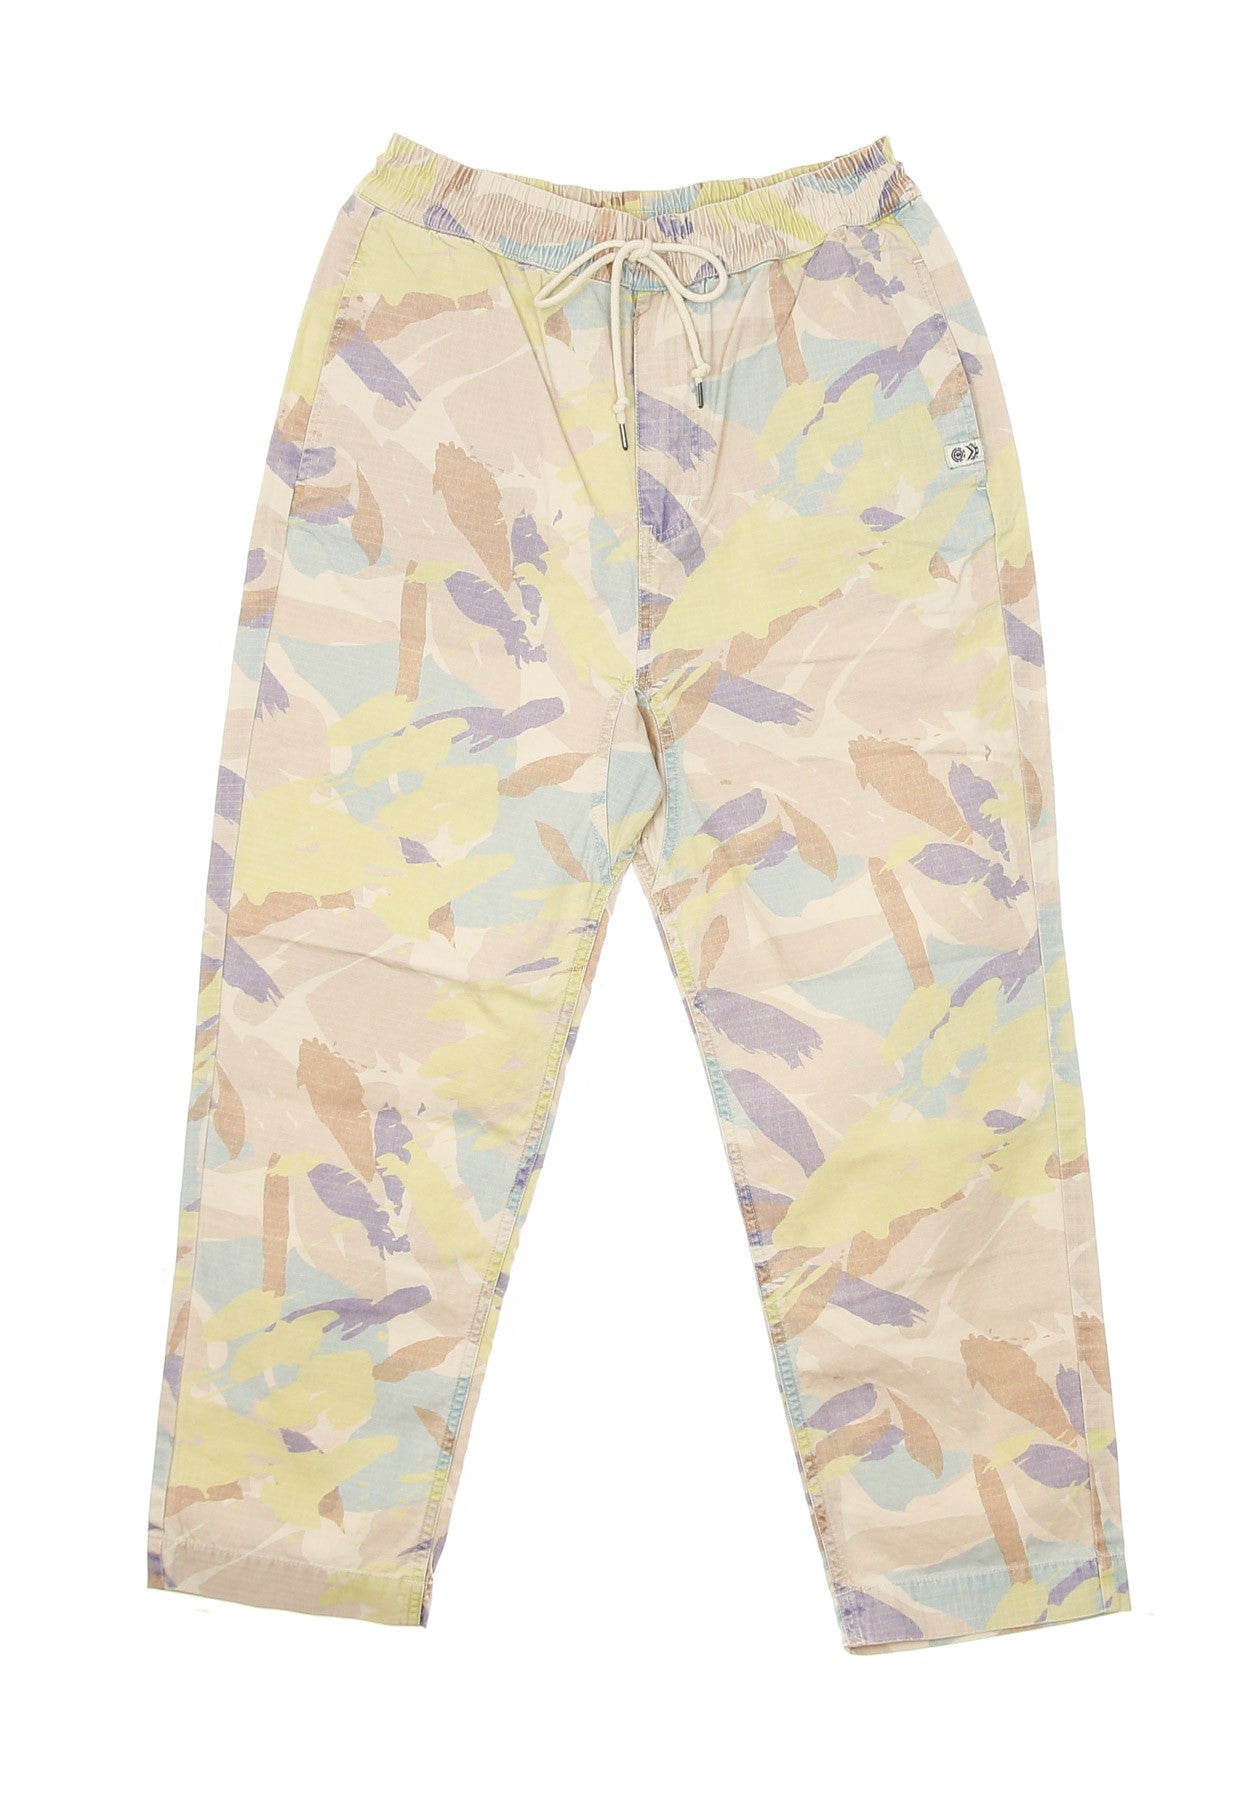 Long Men's Cabourn Overall Pants Abstract Camo